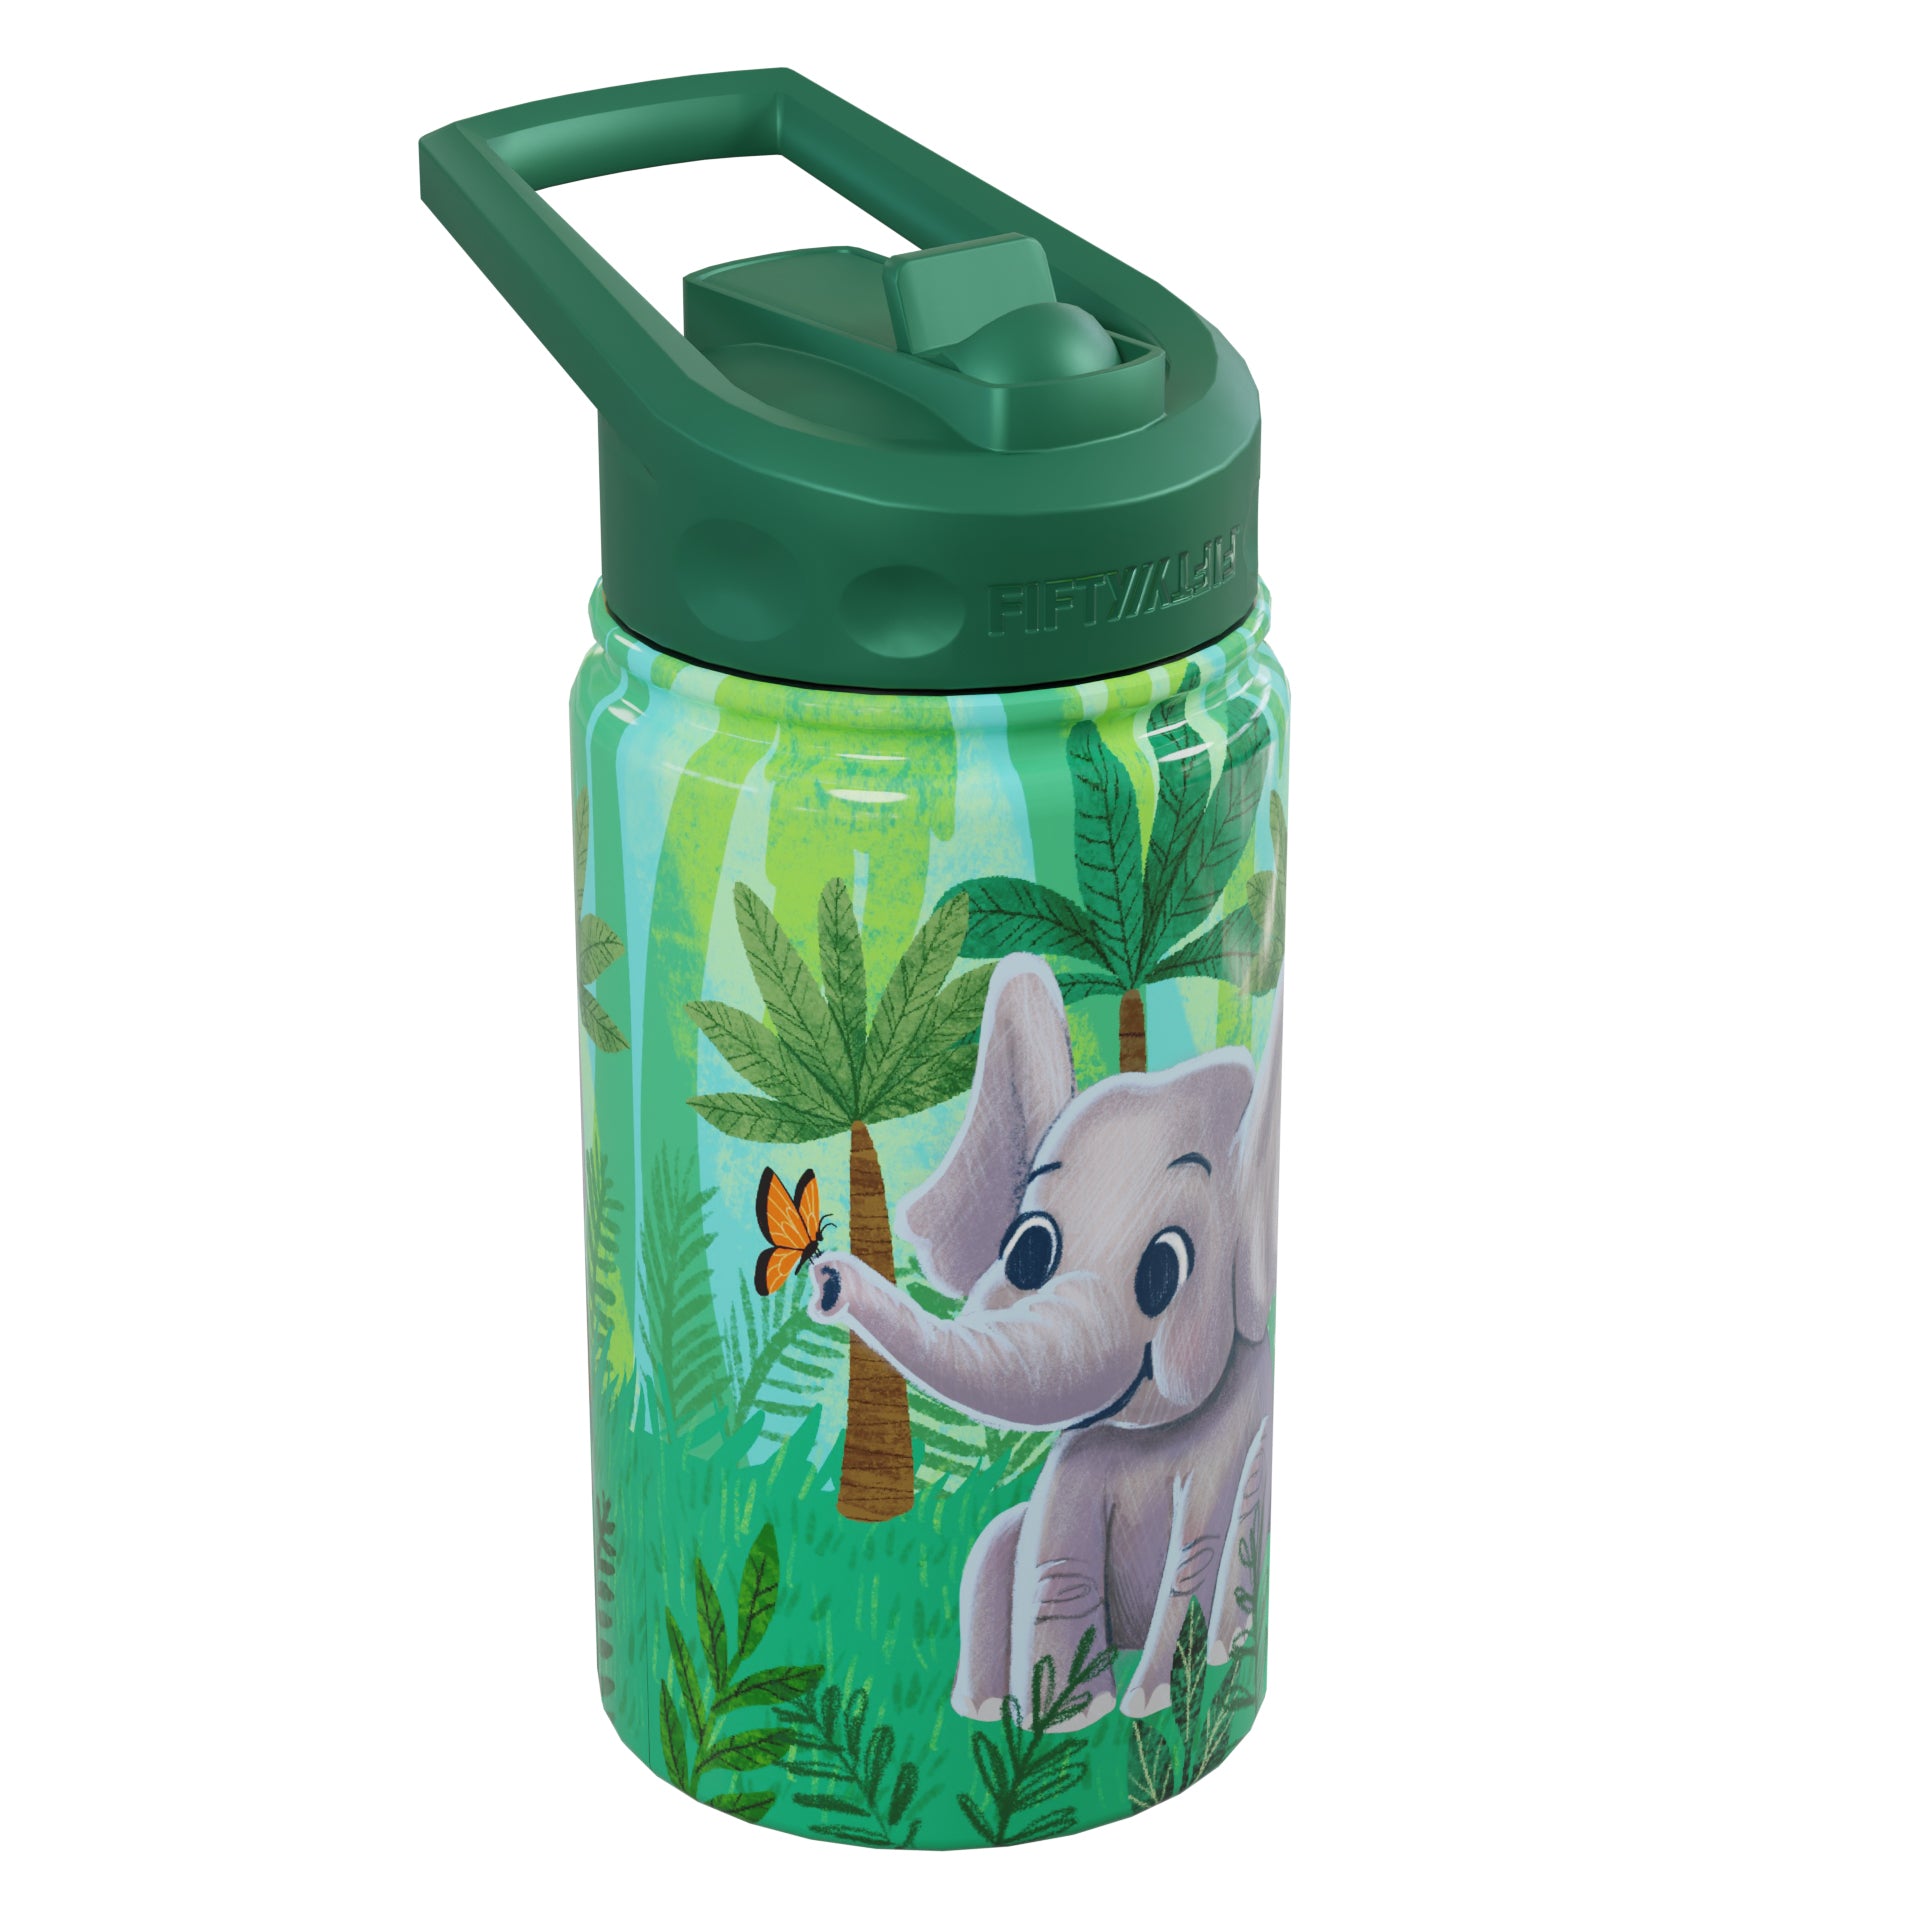 Green Disney Sticker Pack Water Resistant for Water Bottles and